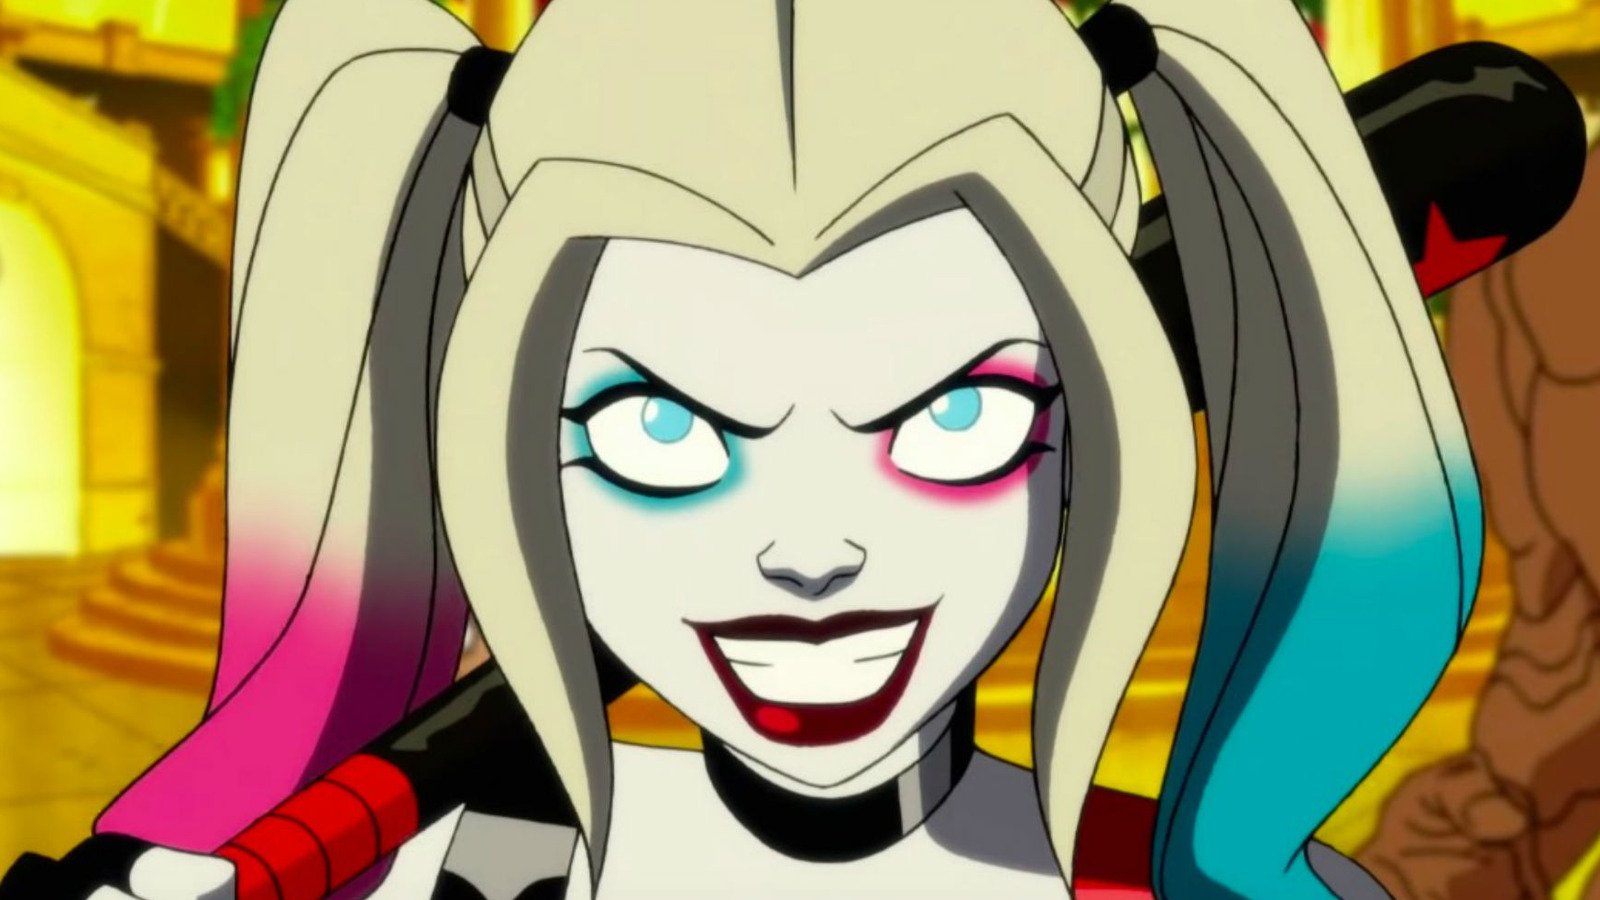 12 Other Adult Animated Series Harley Quinn Fans Should Watch Next